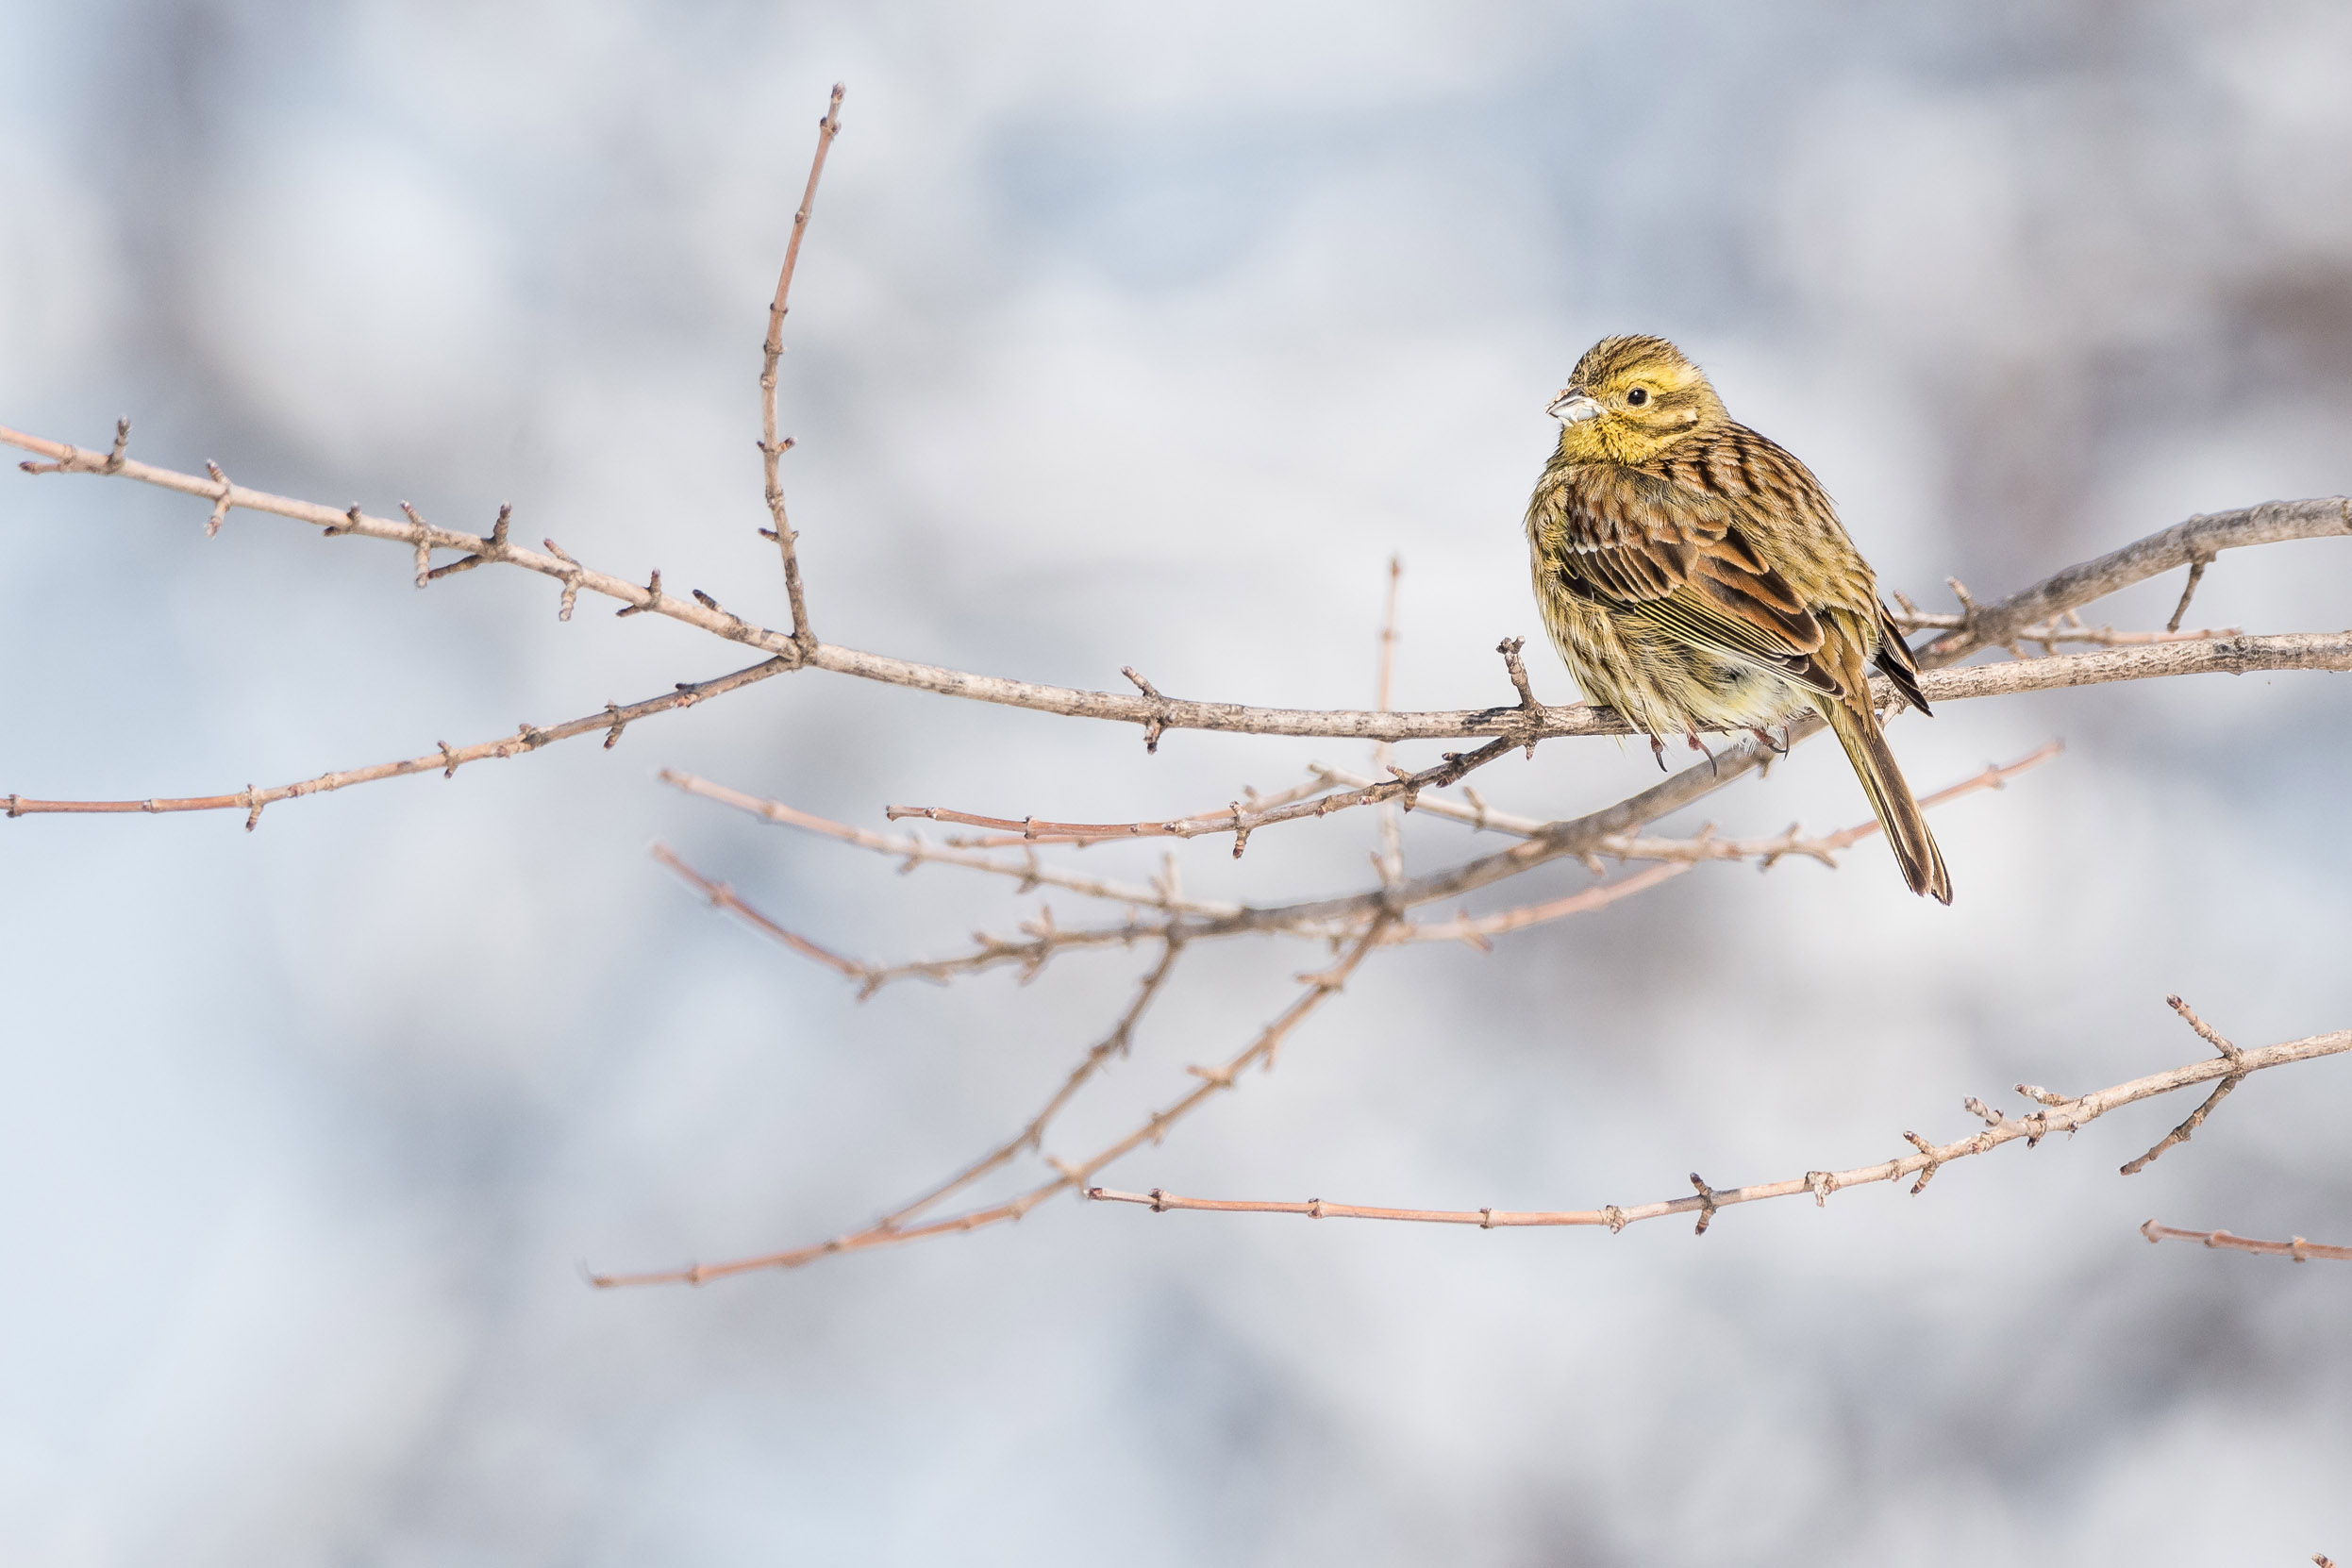 A lone Cirl Bunting perched on a branch with their back to us turning their head to the side.